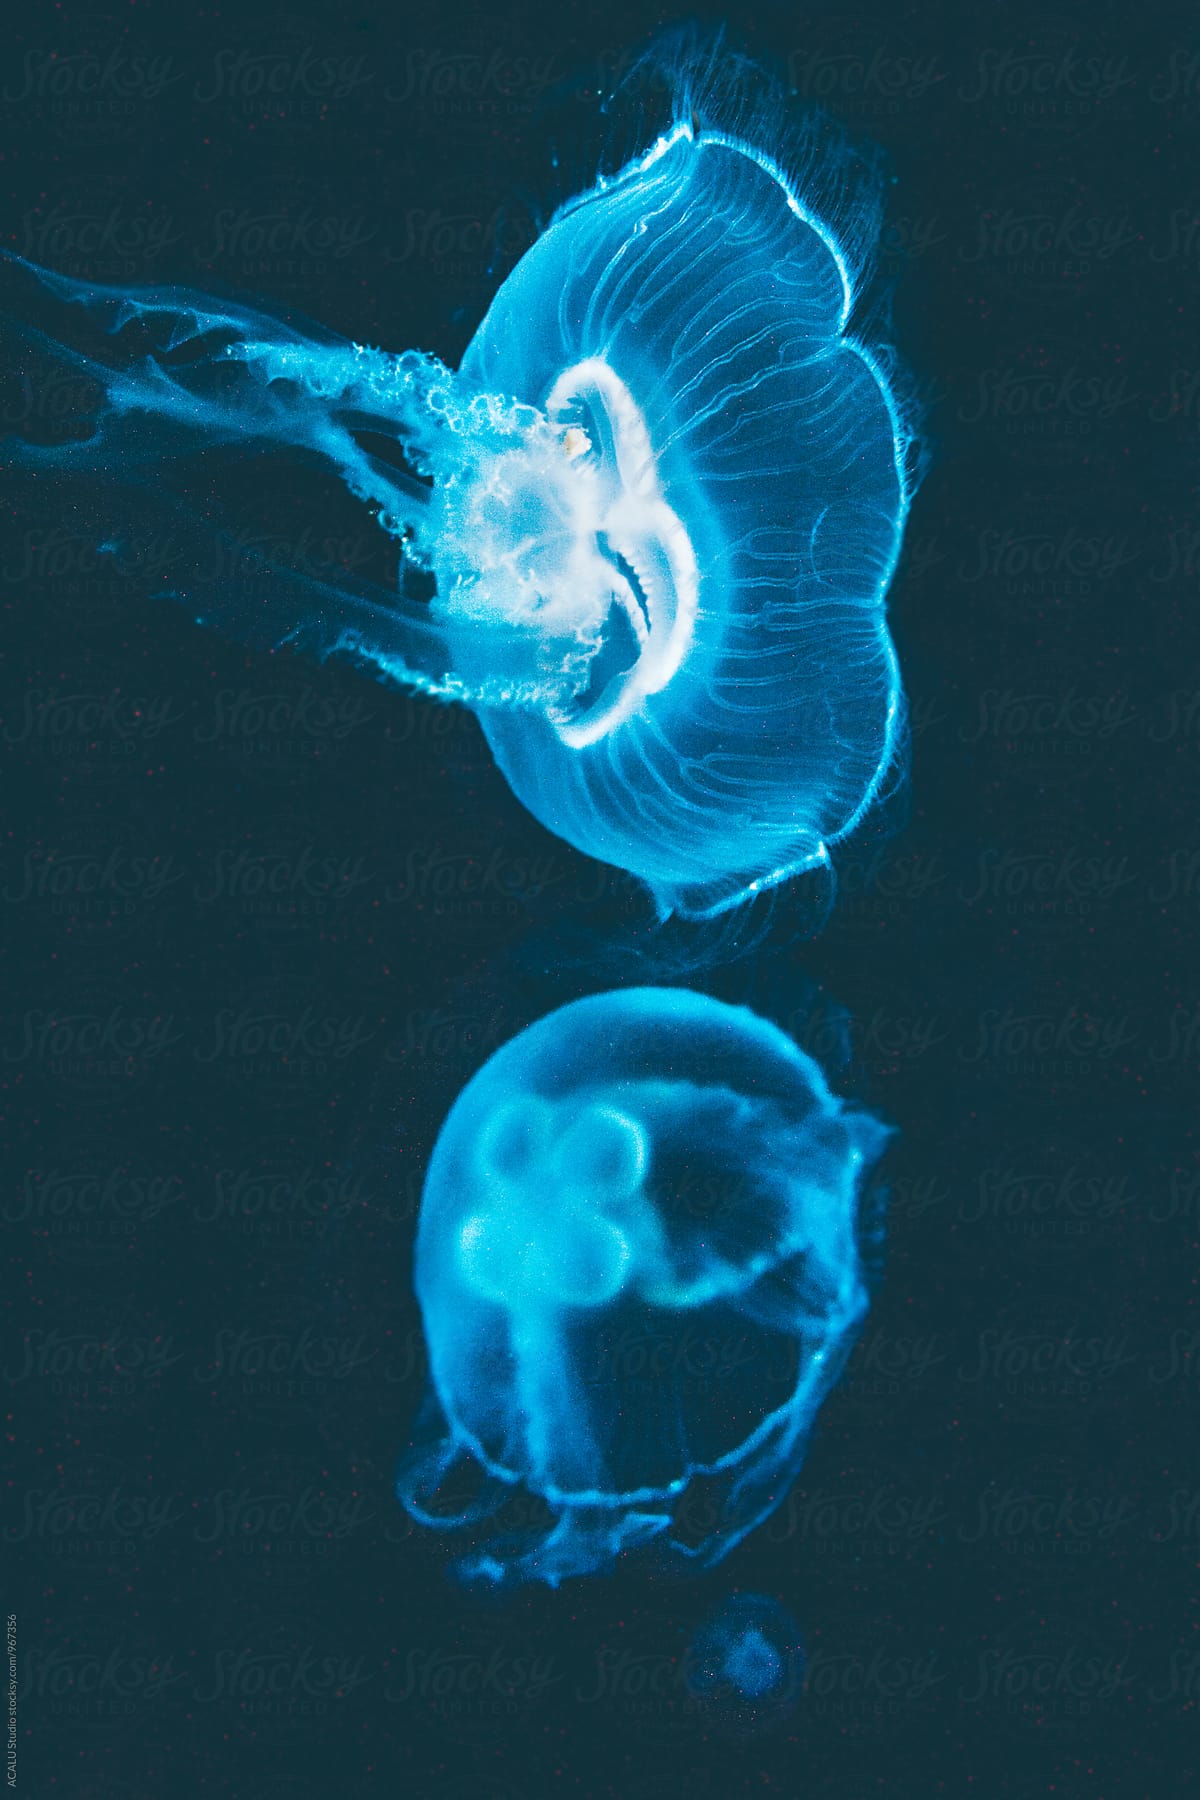 Fluorescent blue jellyfish floating in the water